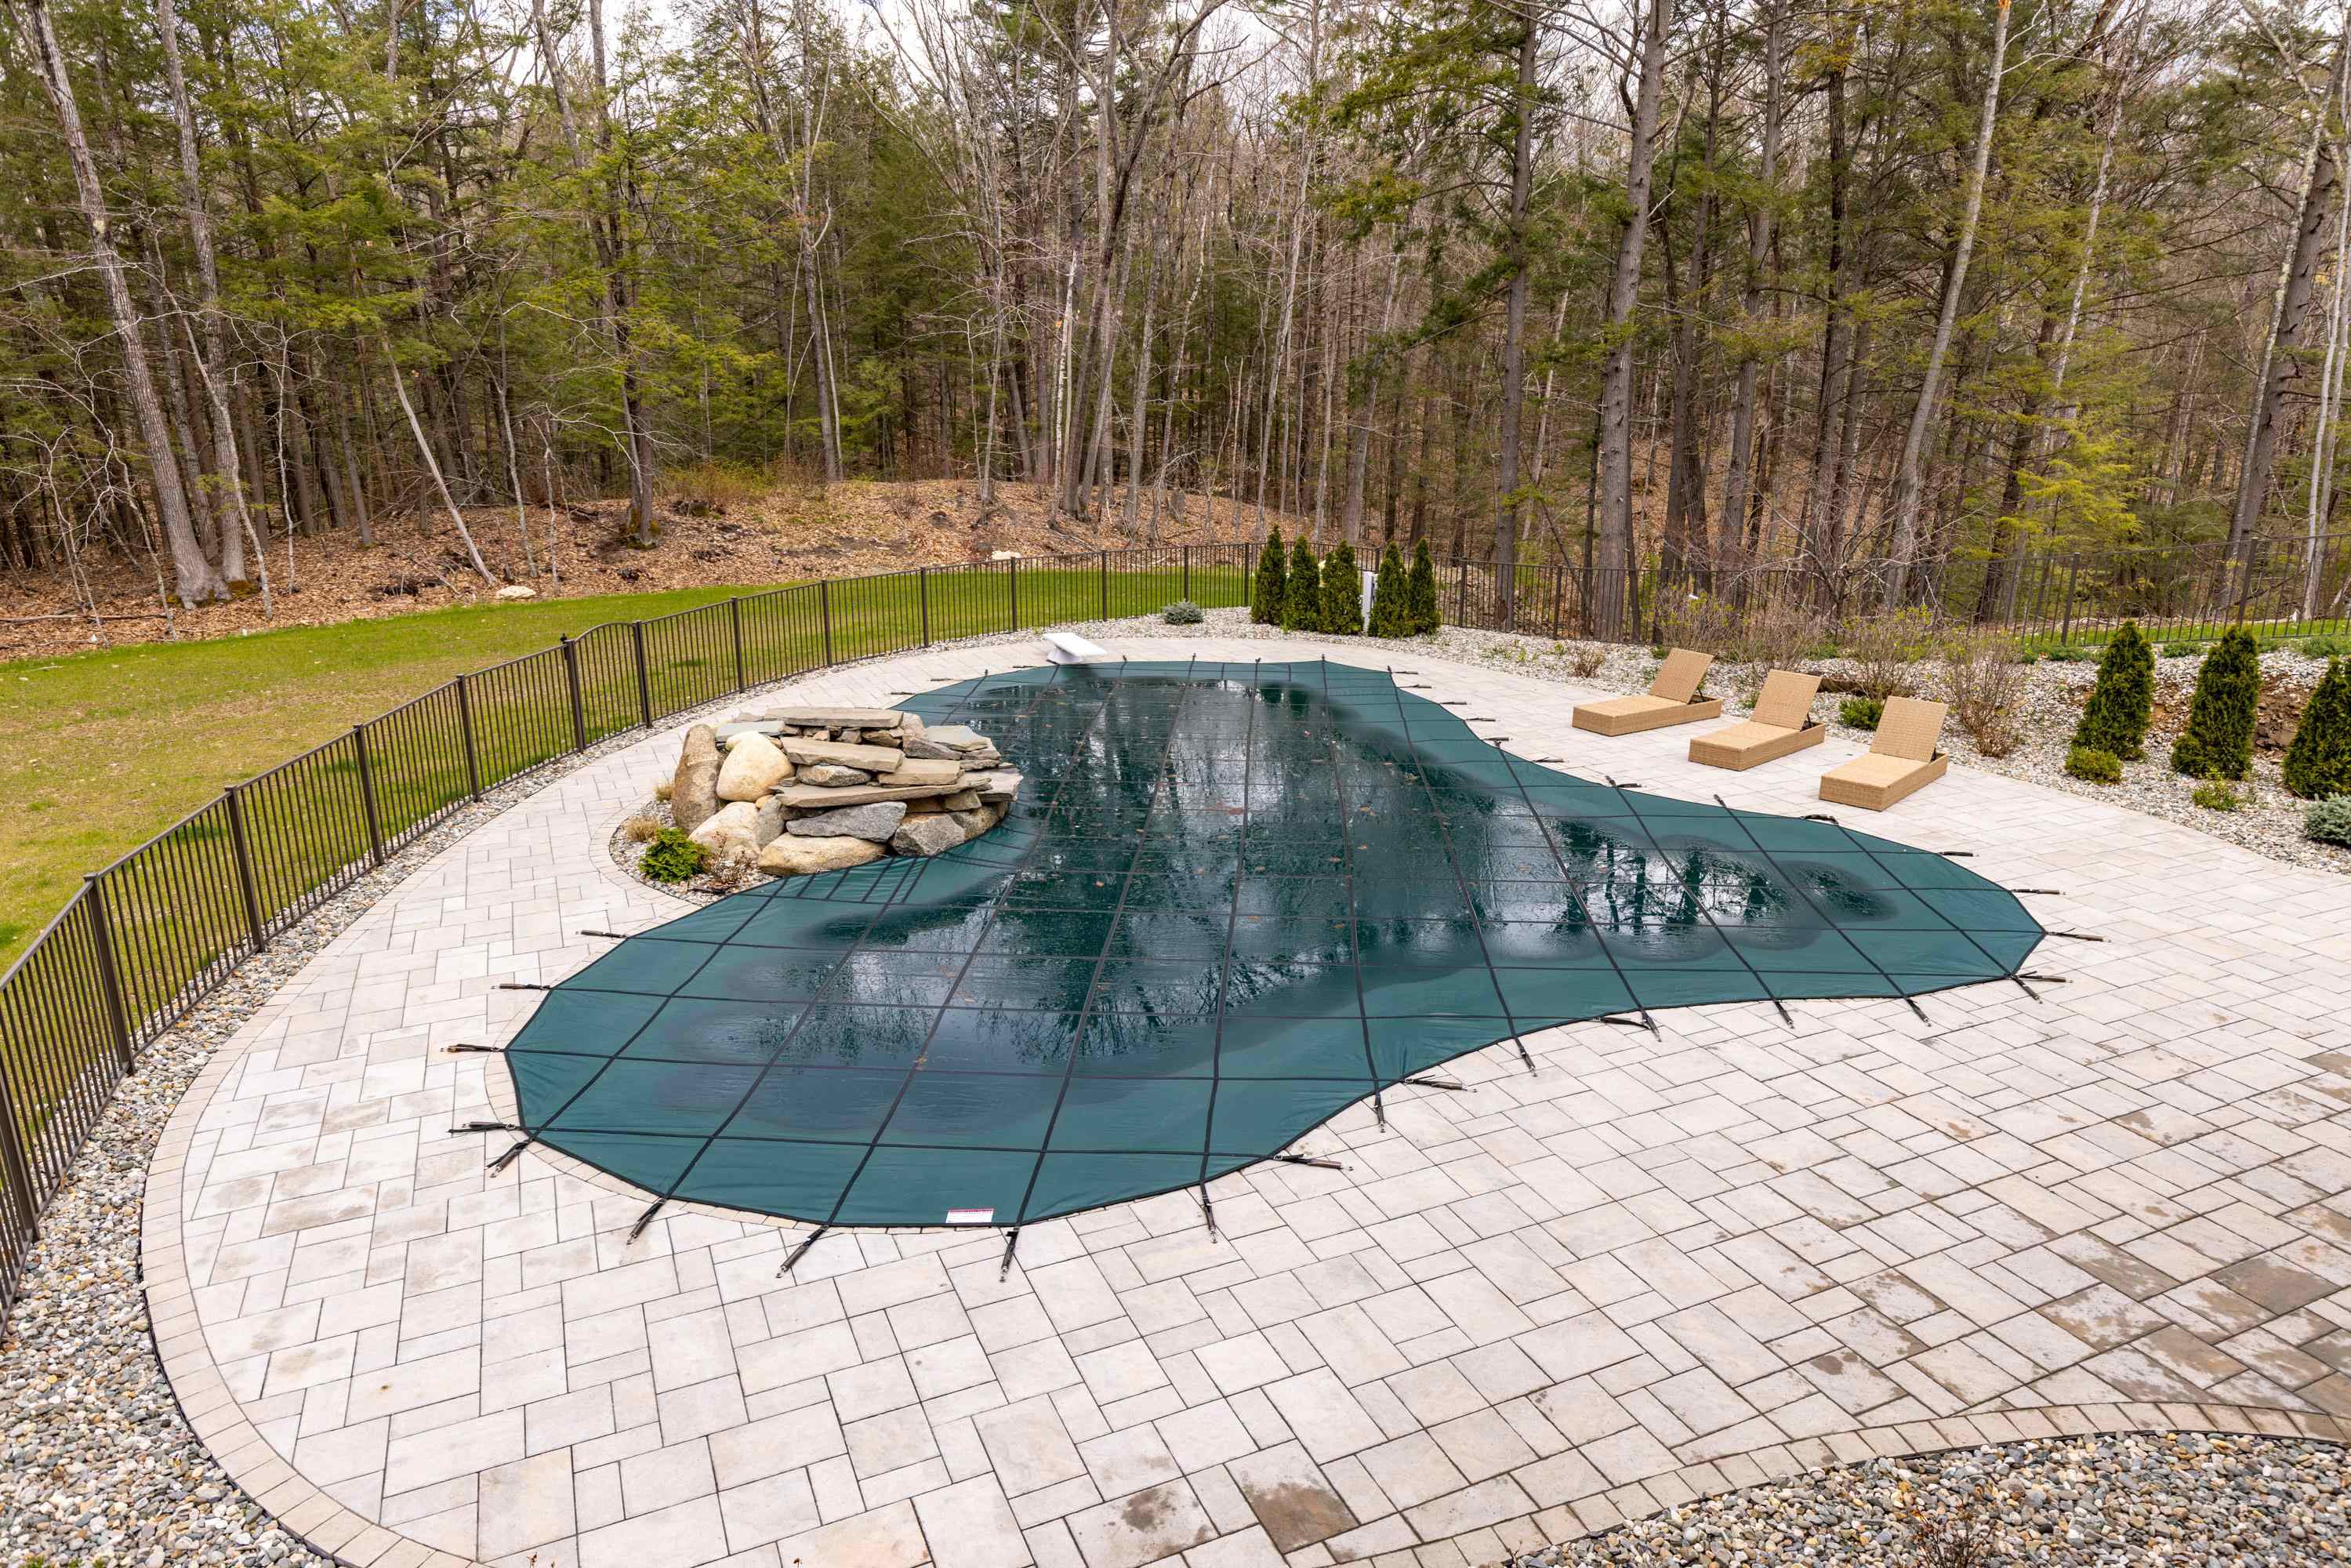 Heated Salt water pool with 2000 sq ft. patio